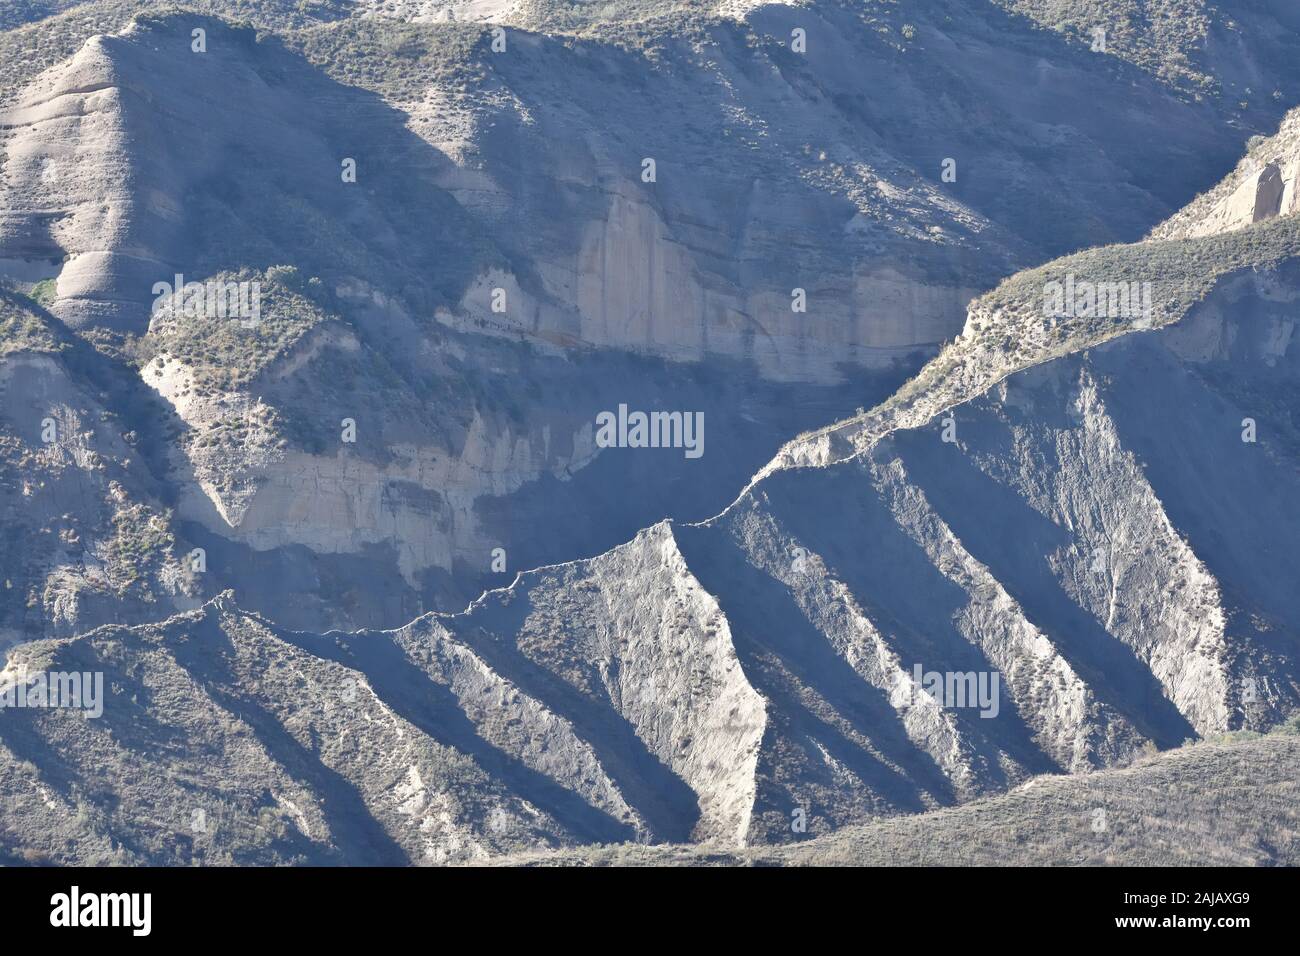 Large scars in the southern desert hills due to erosion Stock Photo